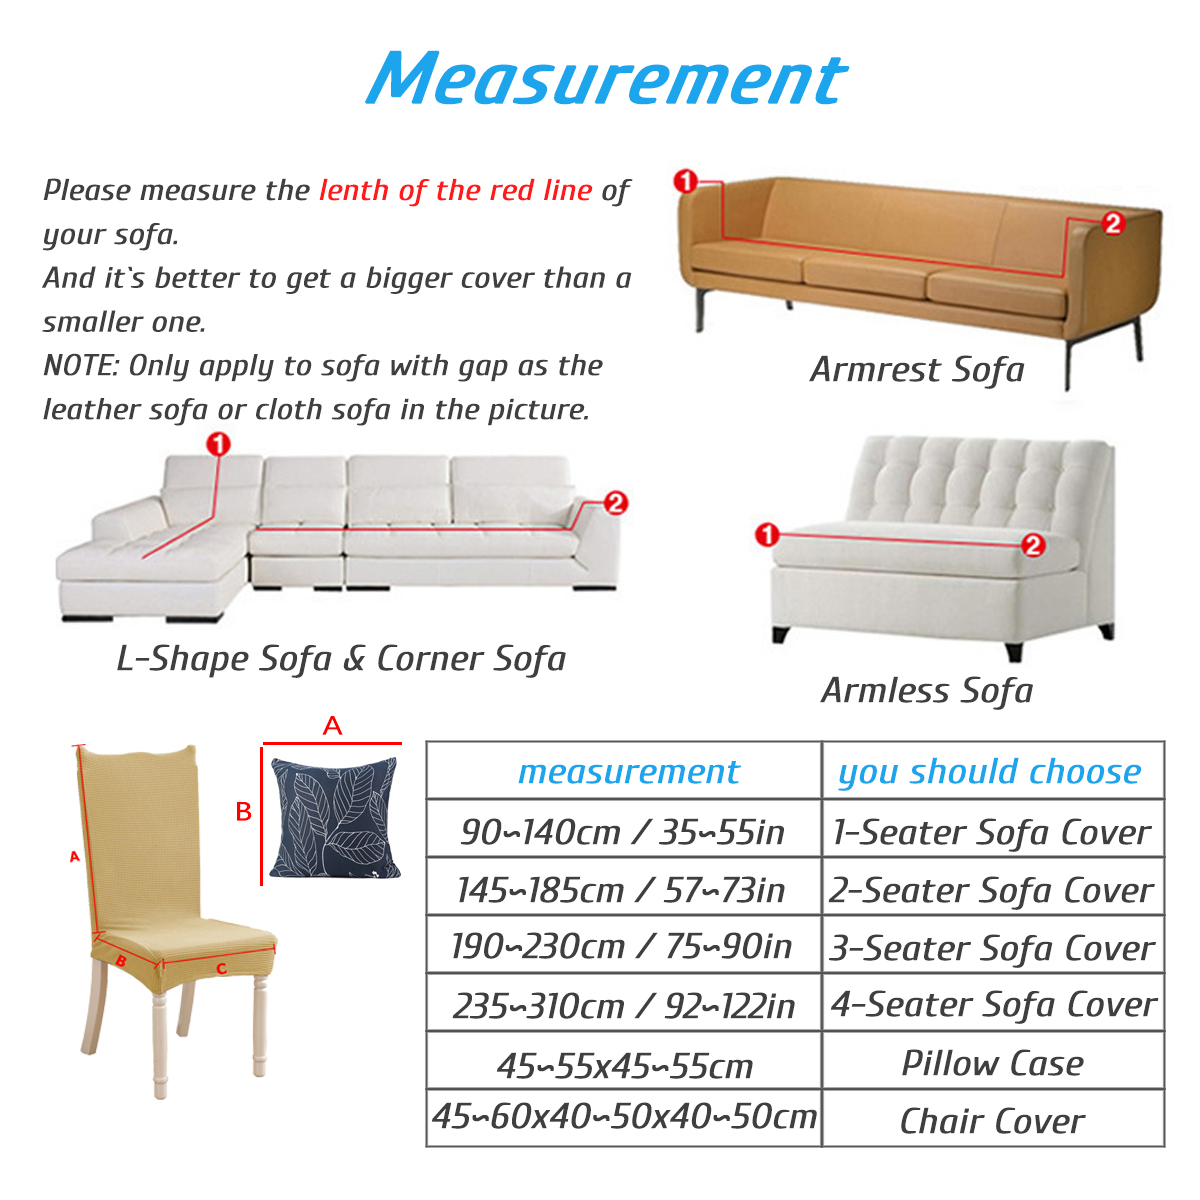 1234-Seater-Home-Soft-Elastic-Sofa-Cover-Easy-Stretch-Slipcover-Protector-Couch-Chair-Covers-1408406-3